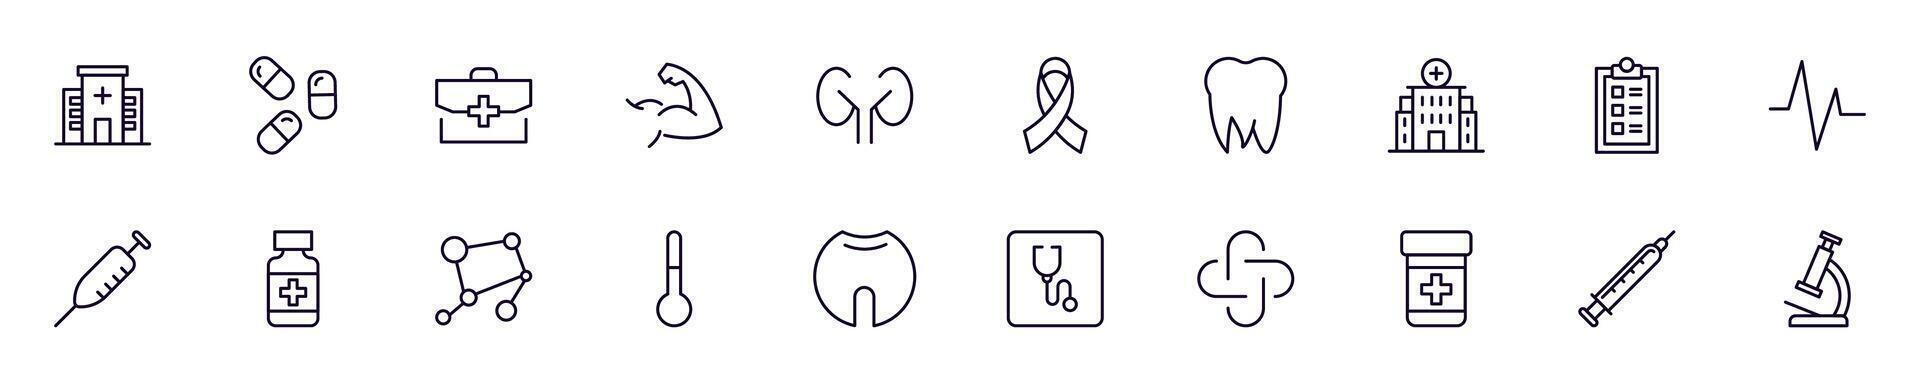 Medicine and healthcare vector pictogram collection. Simple linear illustration that can be used as an design element for apps and websites